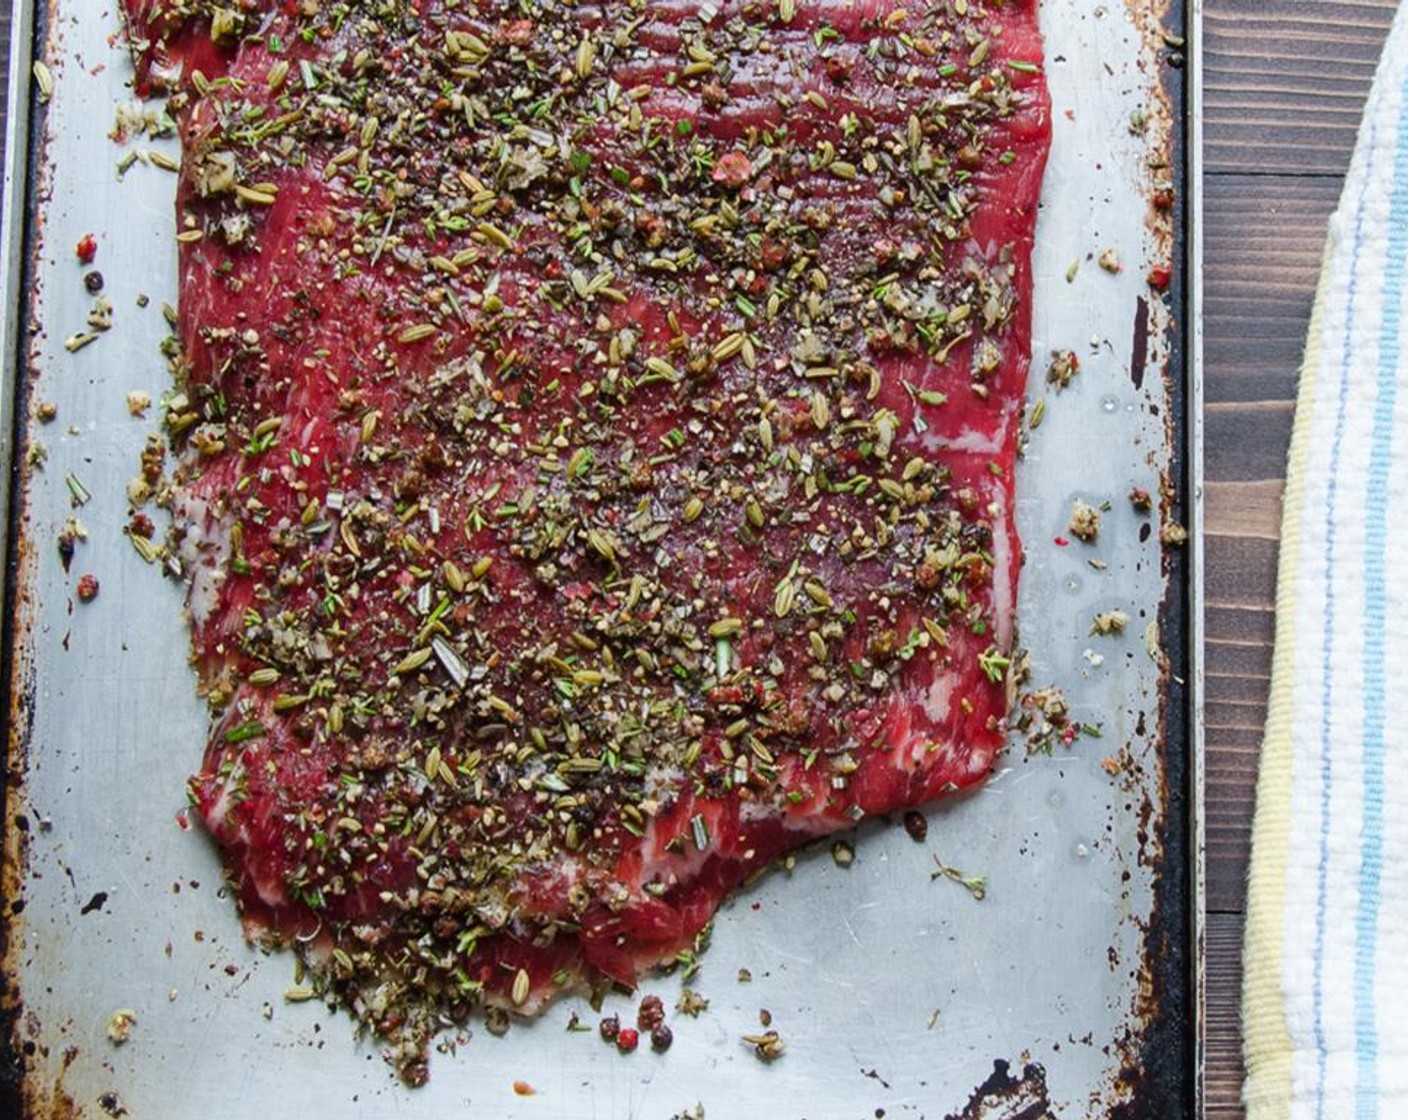 step 5 Sprinkle on half of the peppercorn-herb mixture and press into the steak to adhere. Flip the steak and continue with the remaining olive oil and rub. Press the rub into the steak with your fingers.